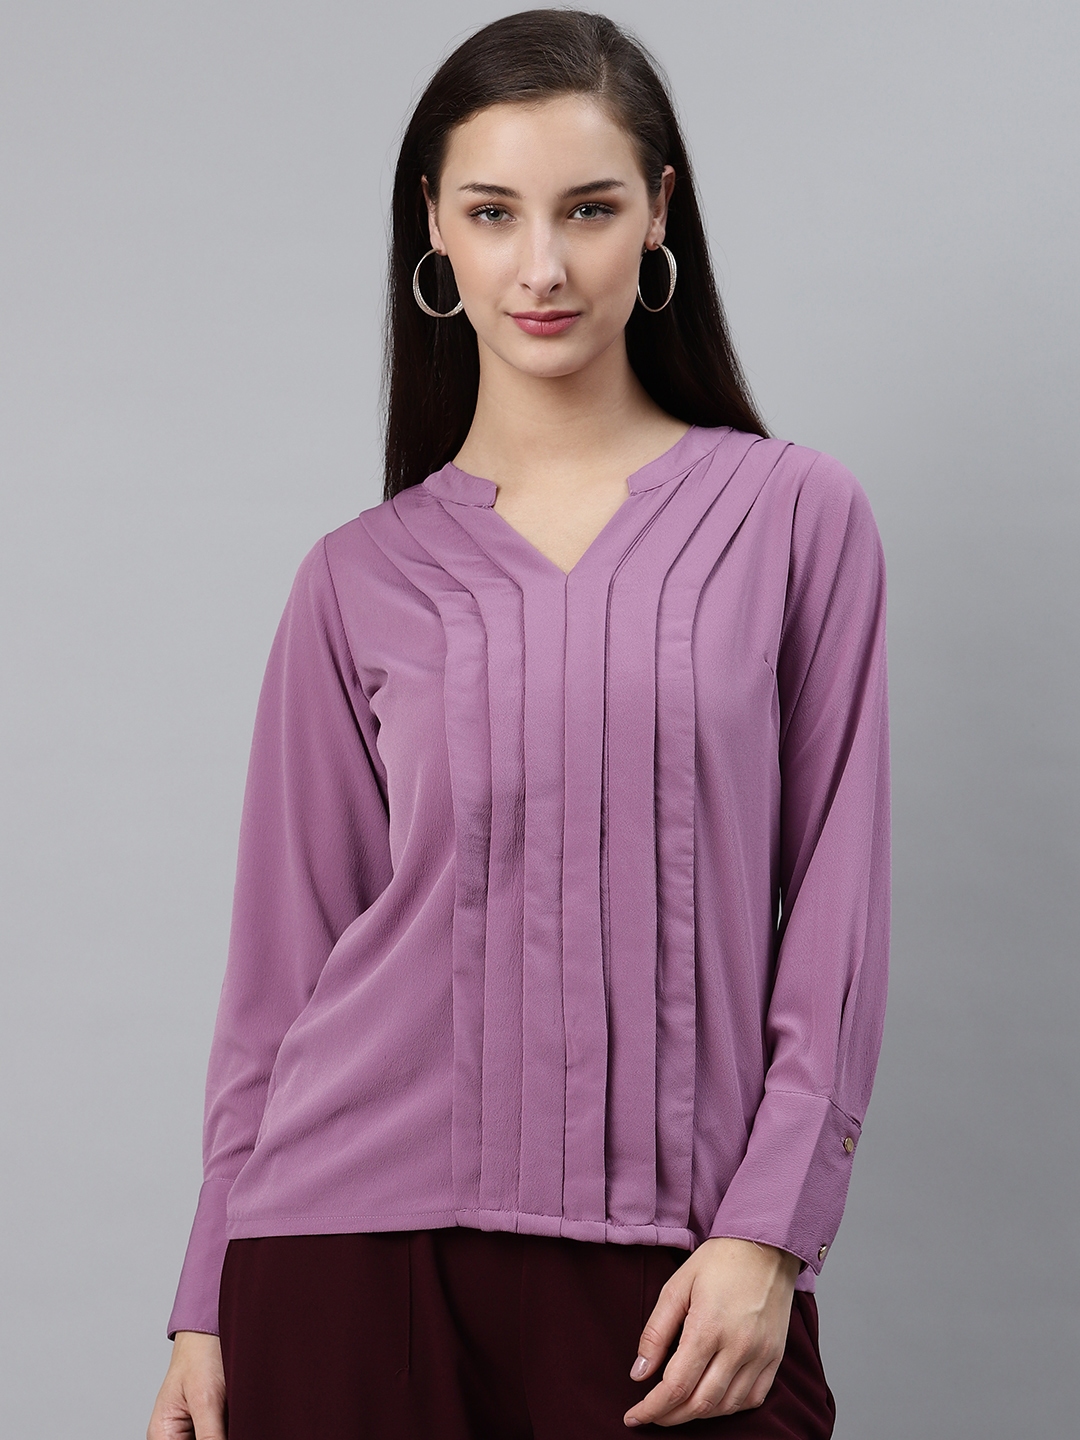 Buy PlusS Mauve Solid Pleated Top - Tops for Women 13997526 | Myntra